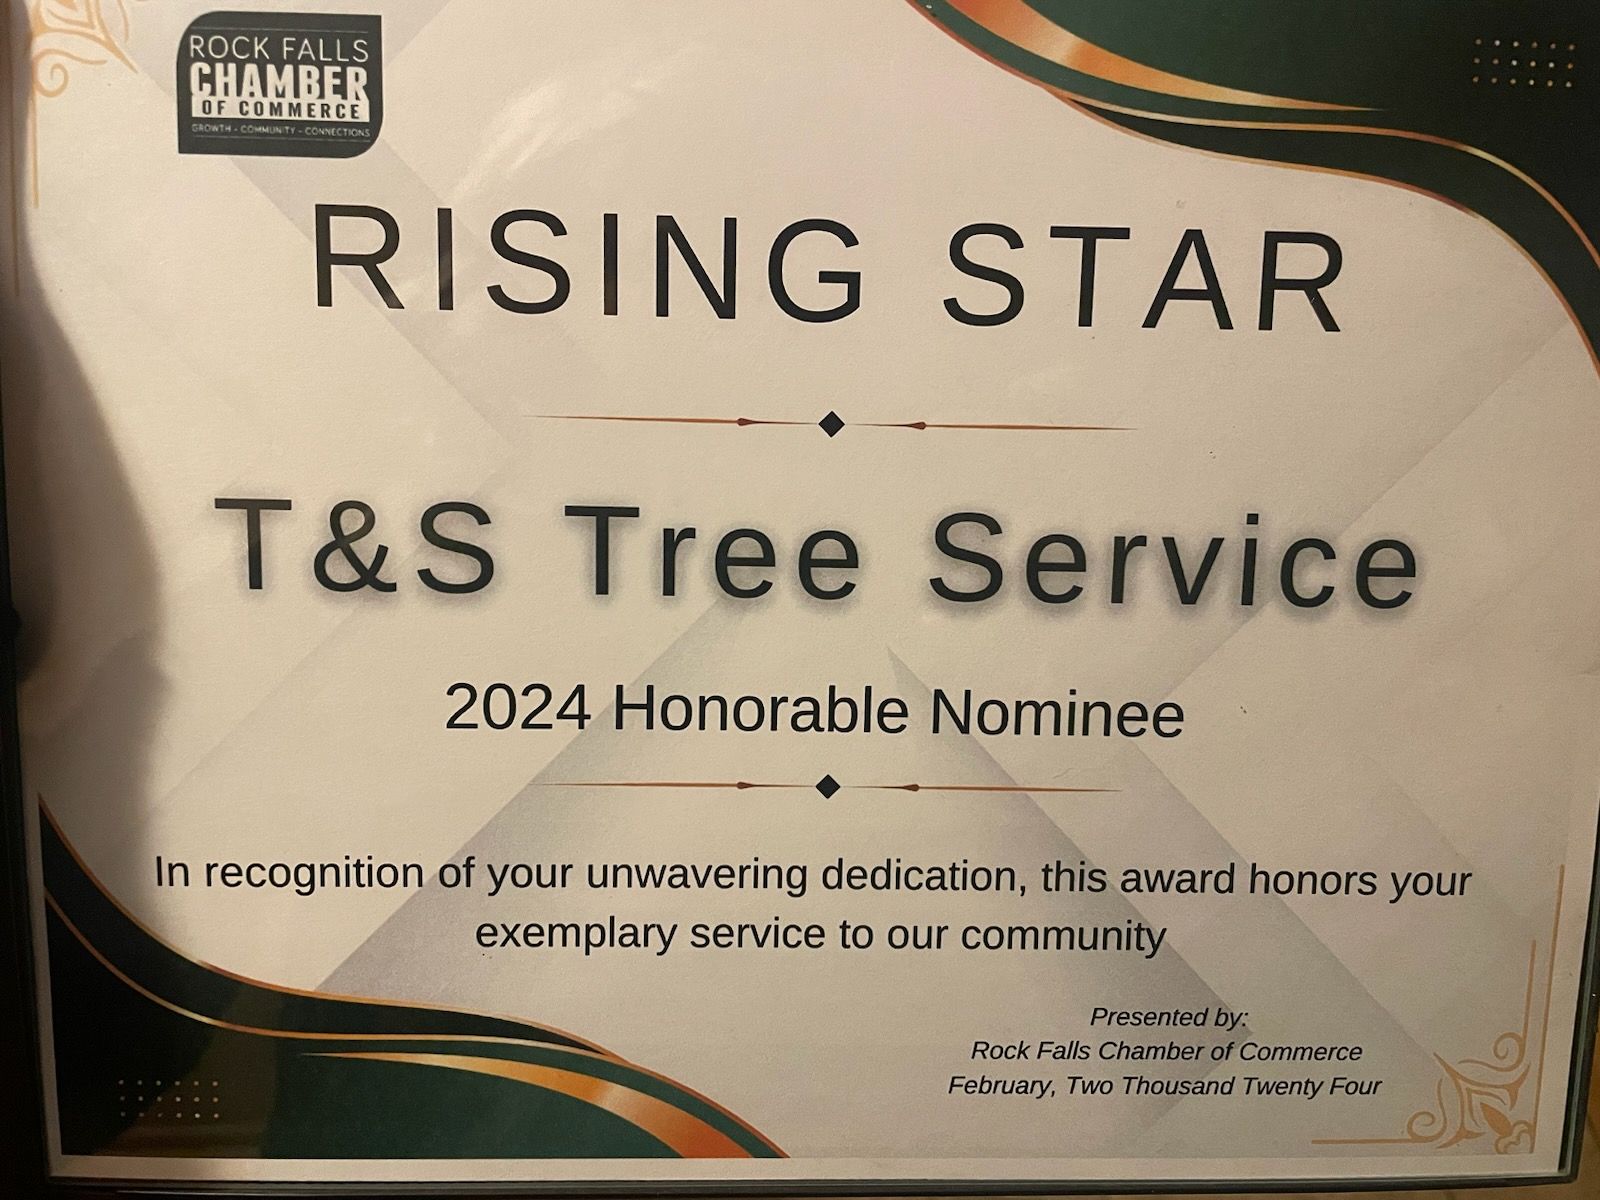 a rising star certificate for t & s tree service